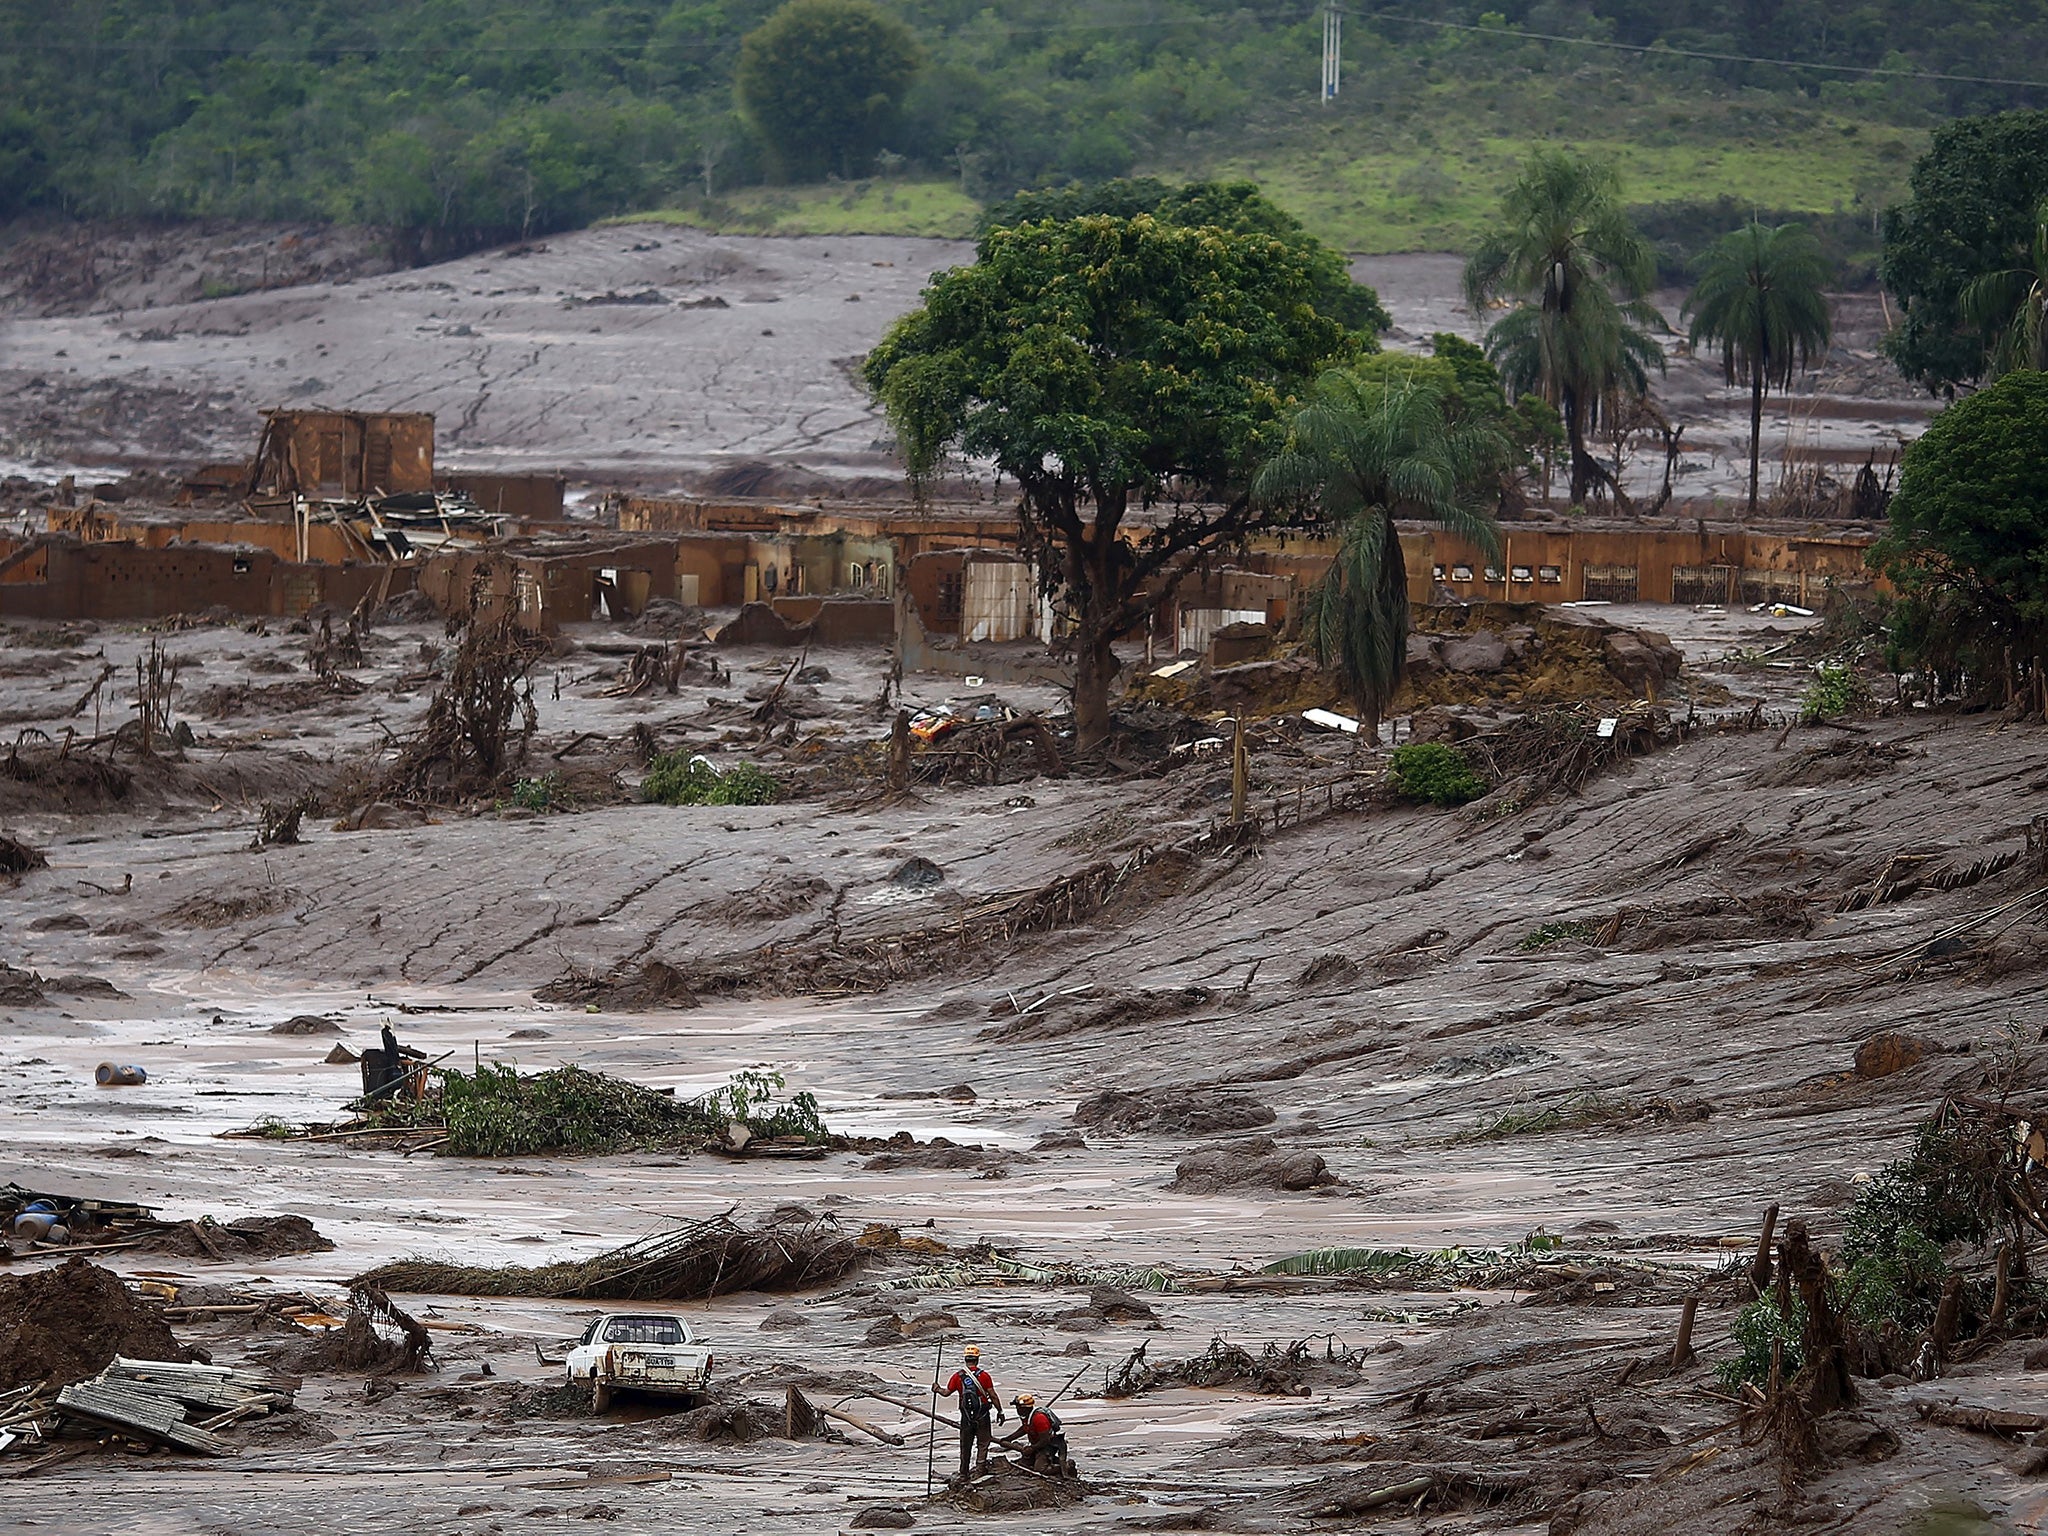 Mudslides, which followed the dam’s collapse, engulfed villages in Minas Gerais state